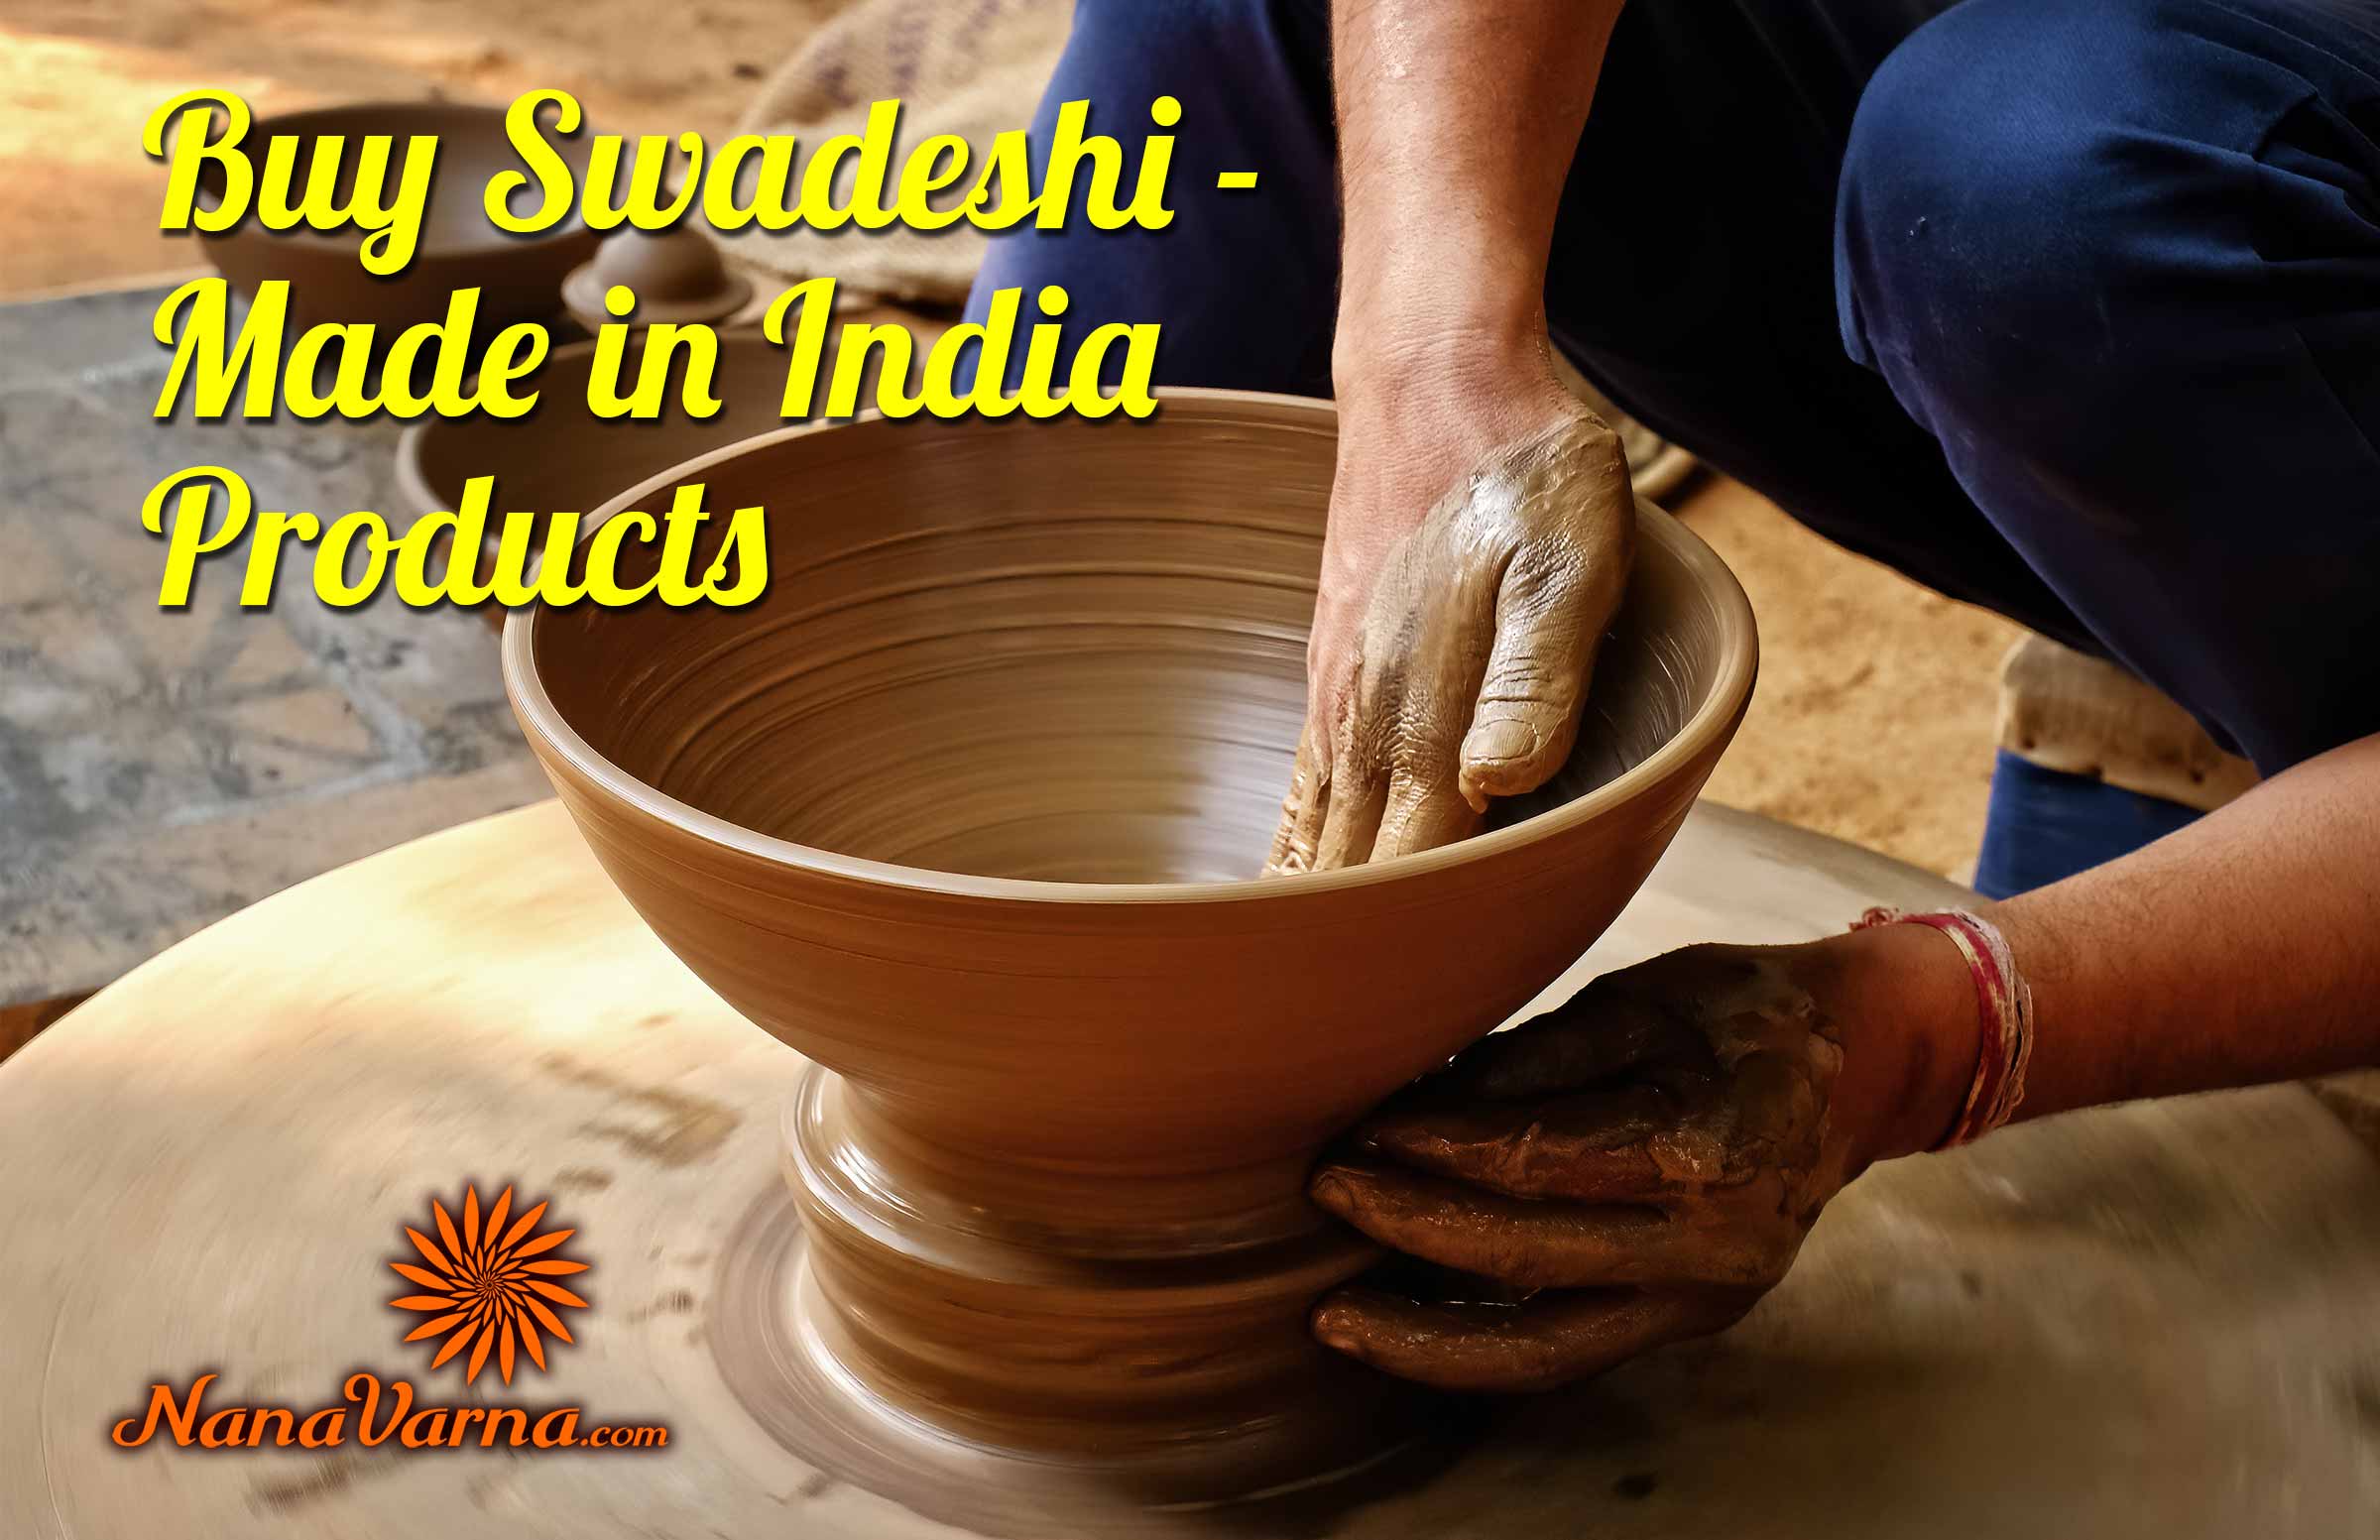 made in india products